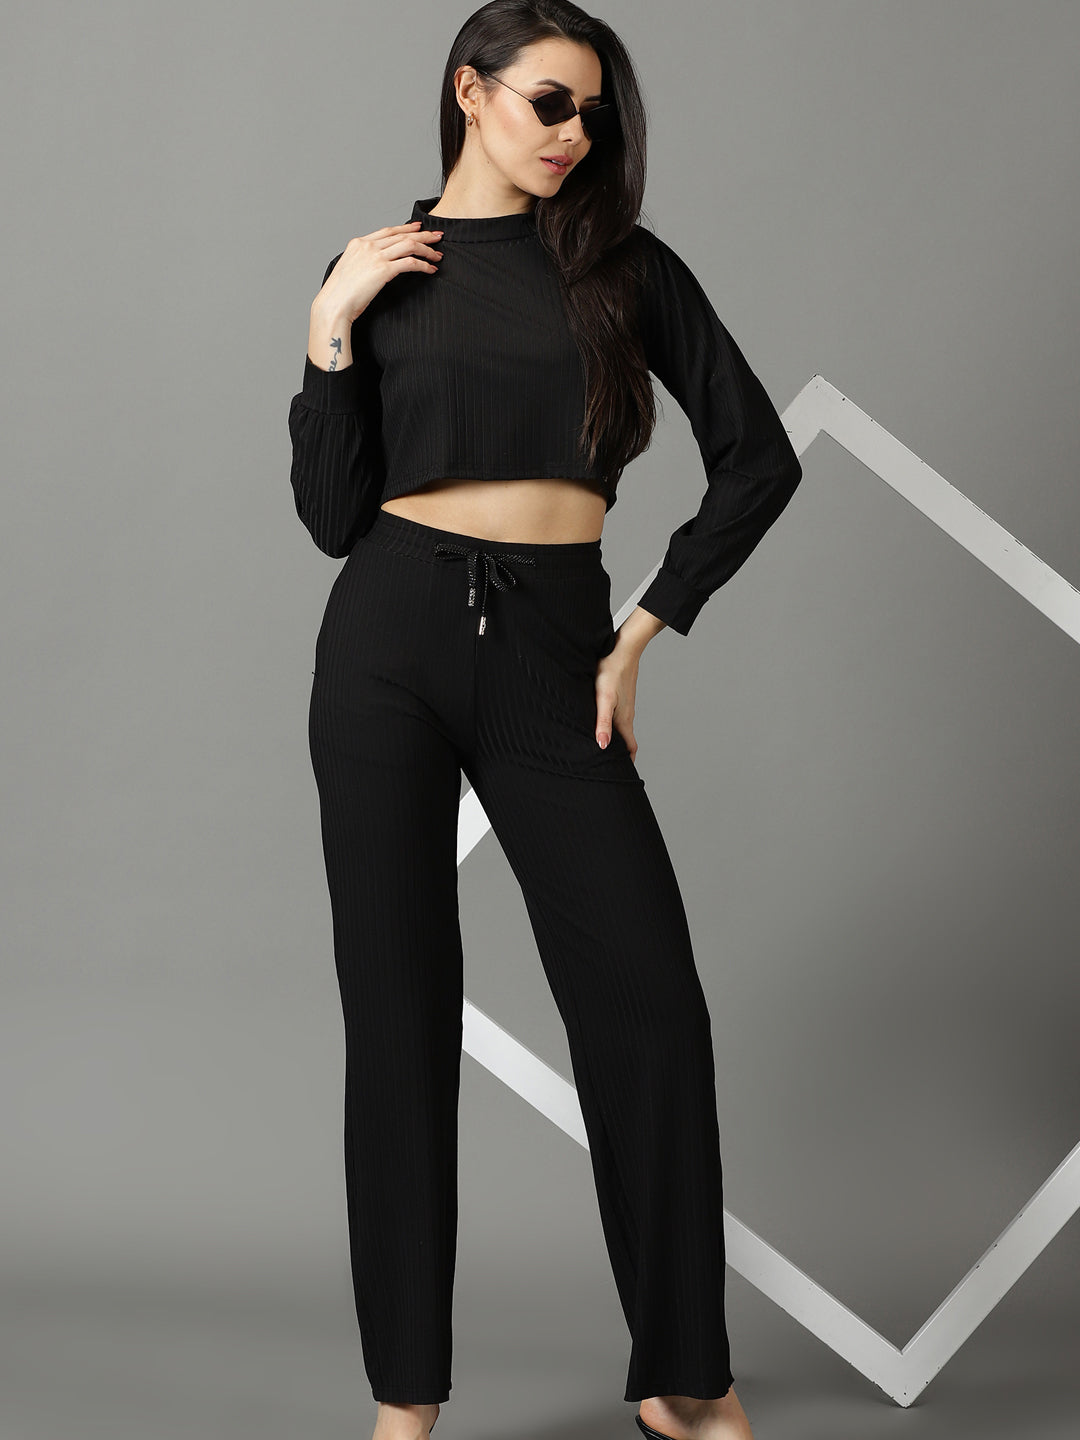 Women's Black Solid Co-Ords